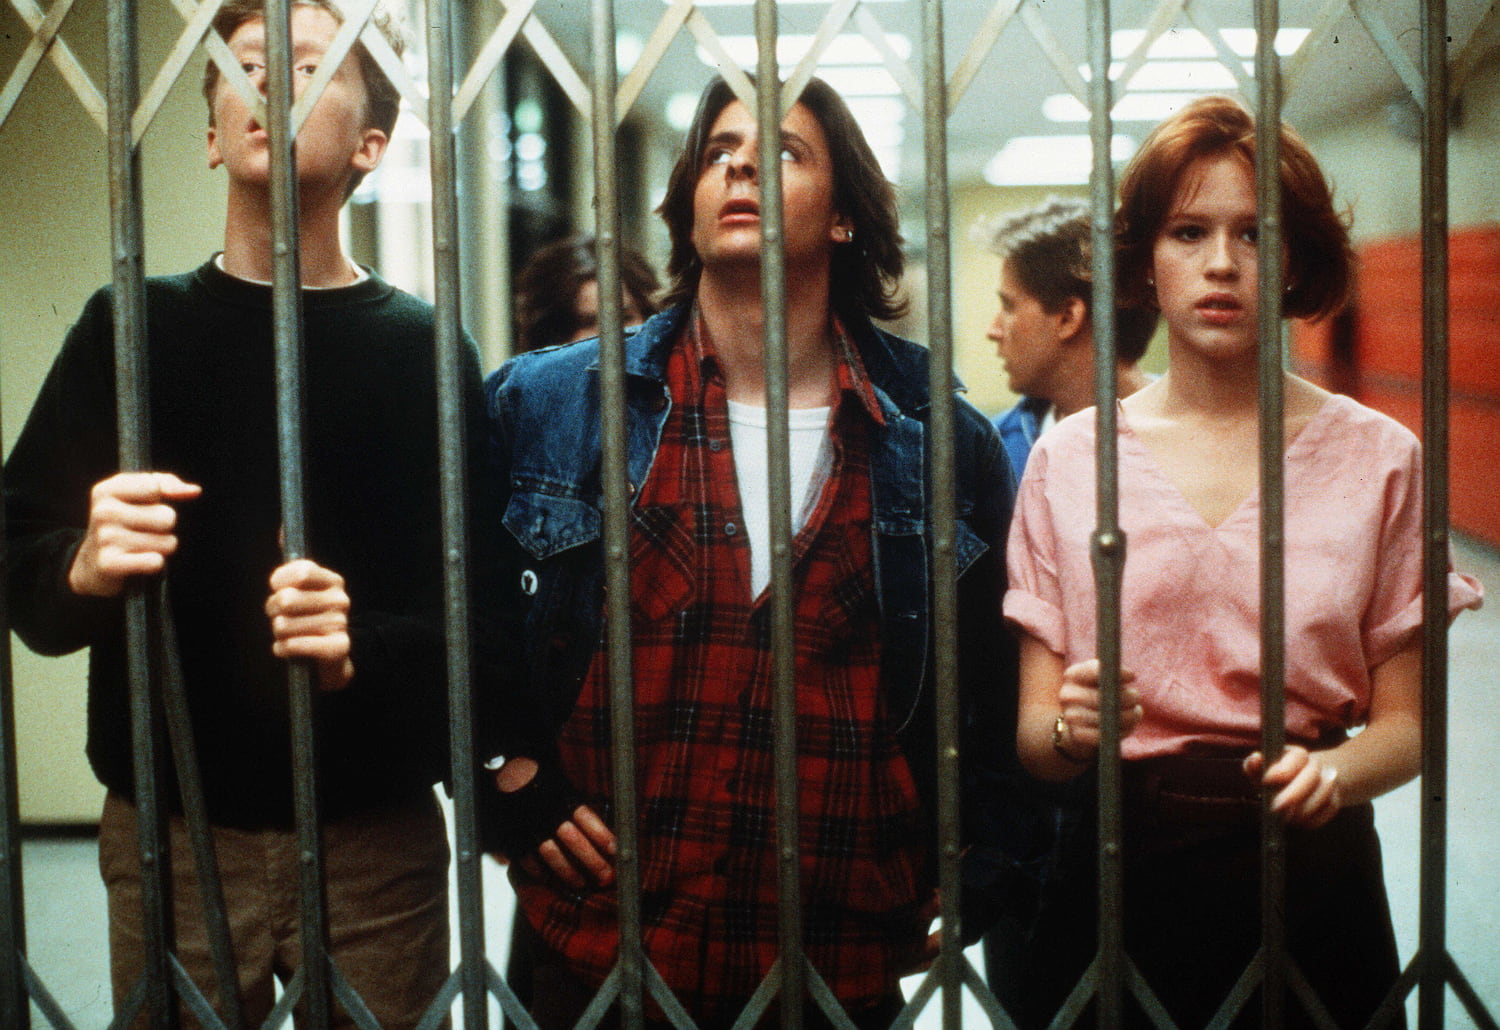 Characters in the Breakfast Club trapped behind a security gate